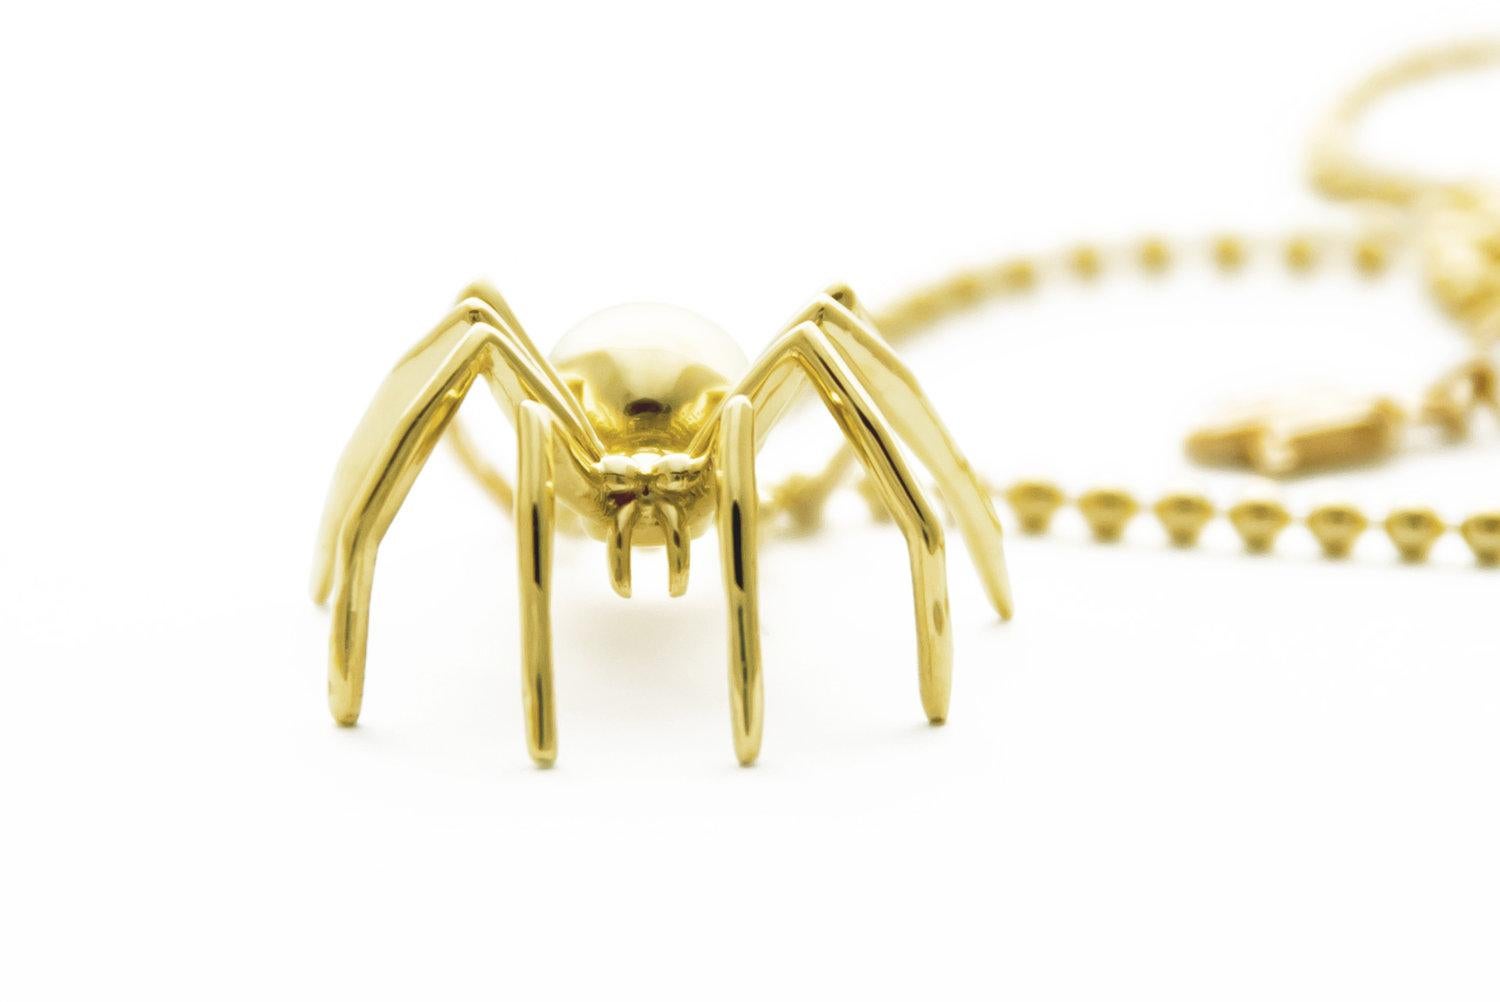 Prepare to be captivated by the intricate beauty and undeniable strength of the Small Spider Pendant in Solid 14k Yellow Gold. This striking statement piece is a true testament to elegance and resilience, destined to leave a lasting impression on